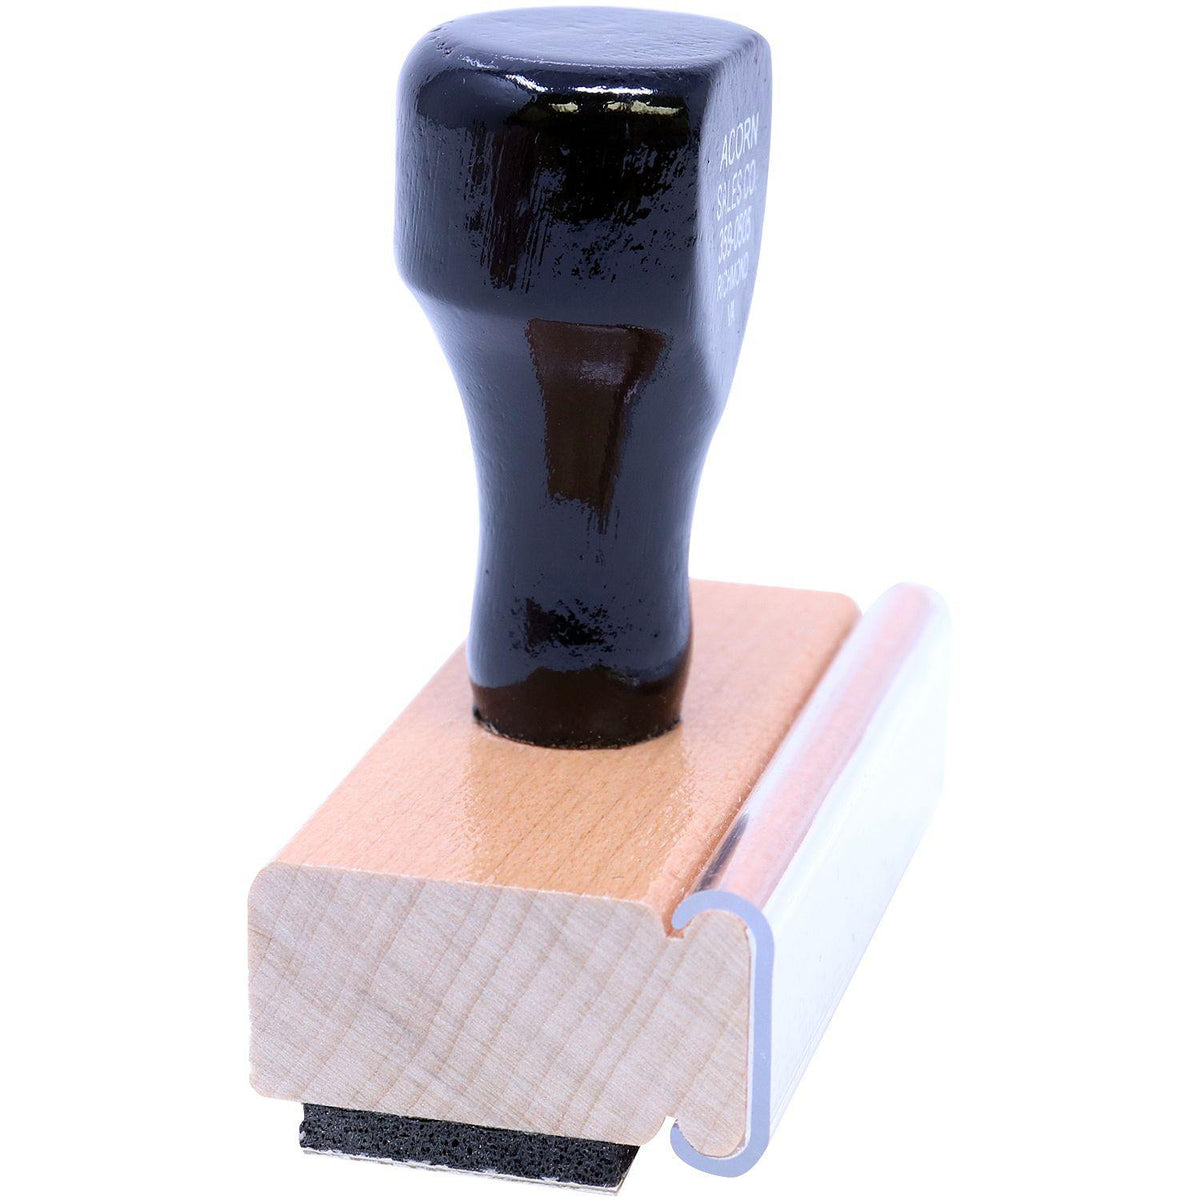 Revised Rubber Stamp - Engineer Seal Stamps - Brand_Acorn, Impression Size_Small, Stamp Type_Regular Stamp, Type of Use_Office, Type of Use_Teacher